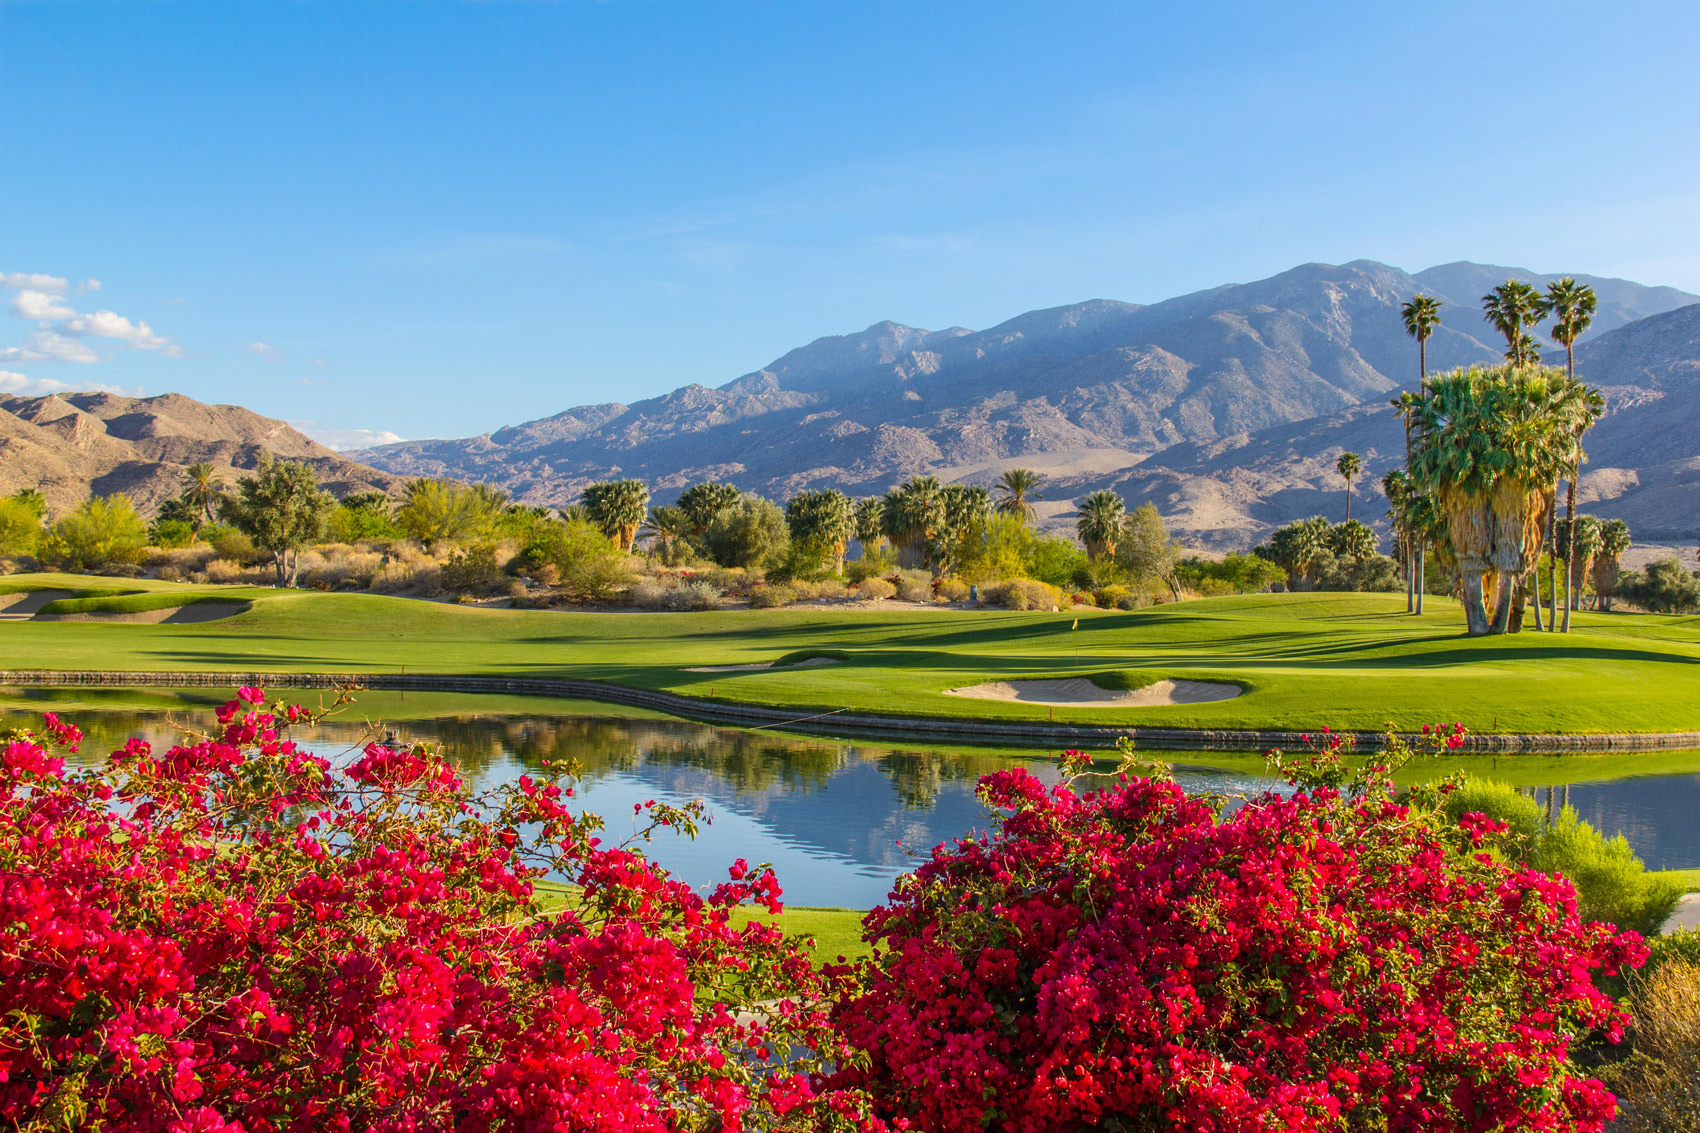 Landscape photo of Palms Springs - Flowers and Greenery and mountain in the background.